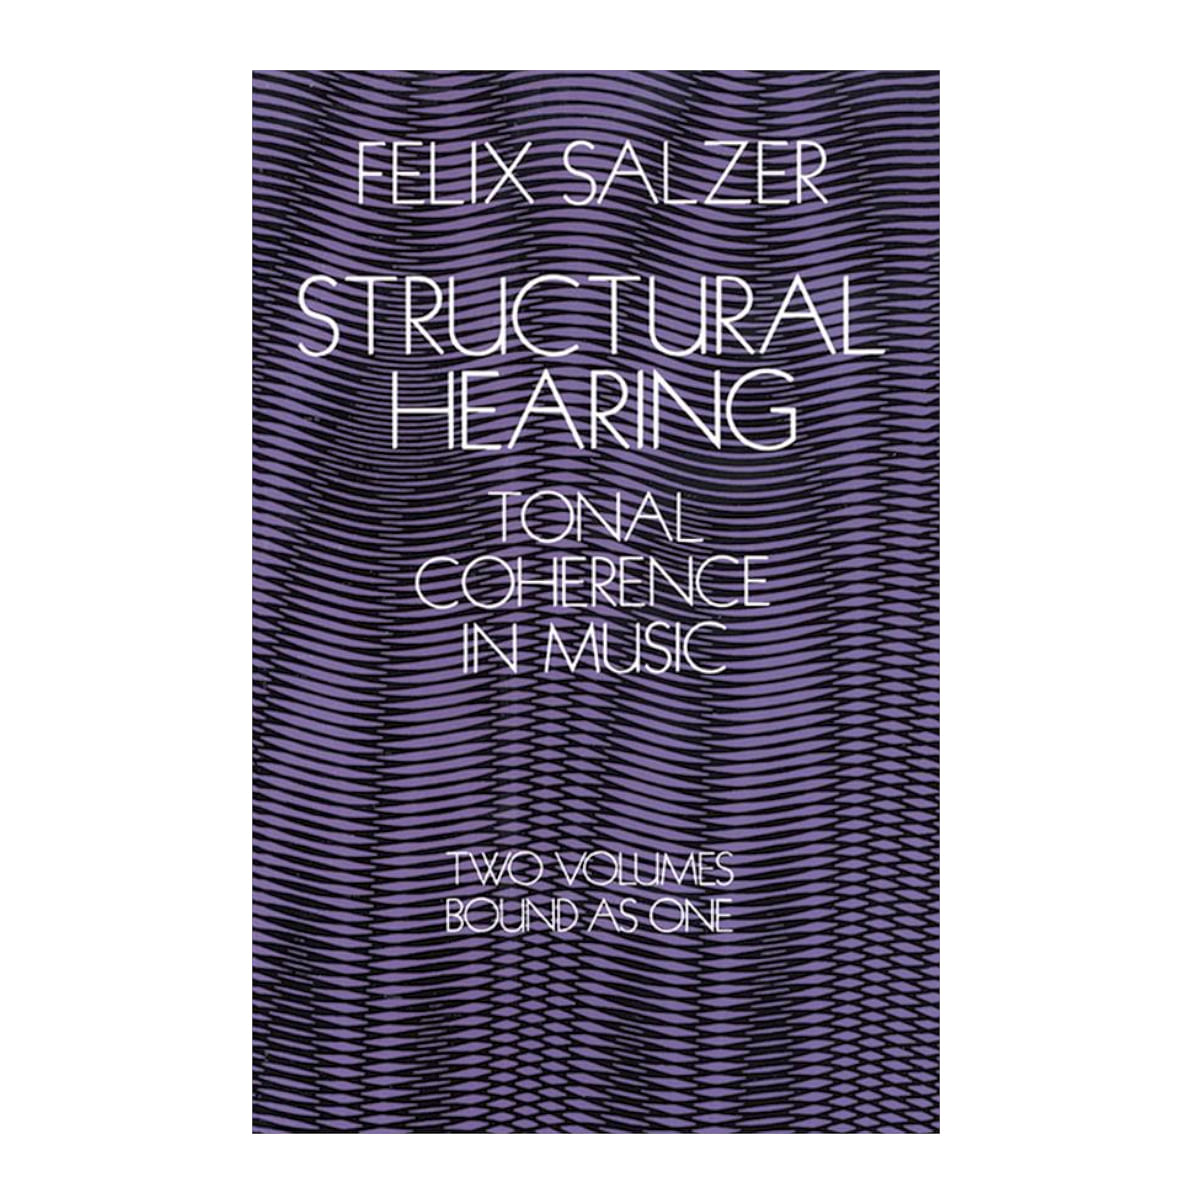 Structural Hearing - Tonal Coherence in Music